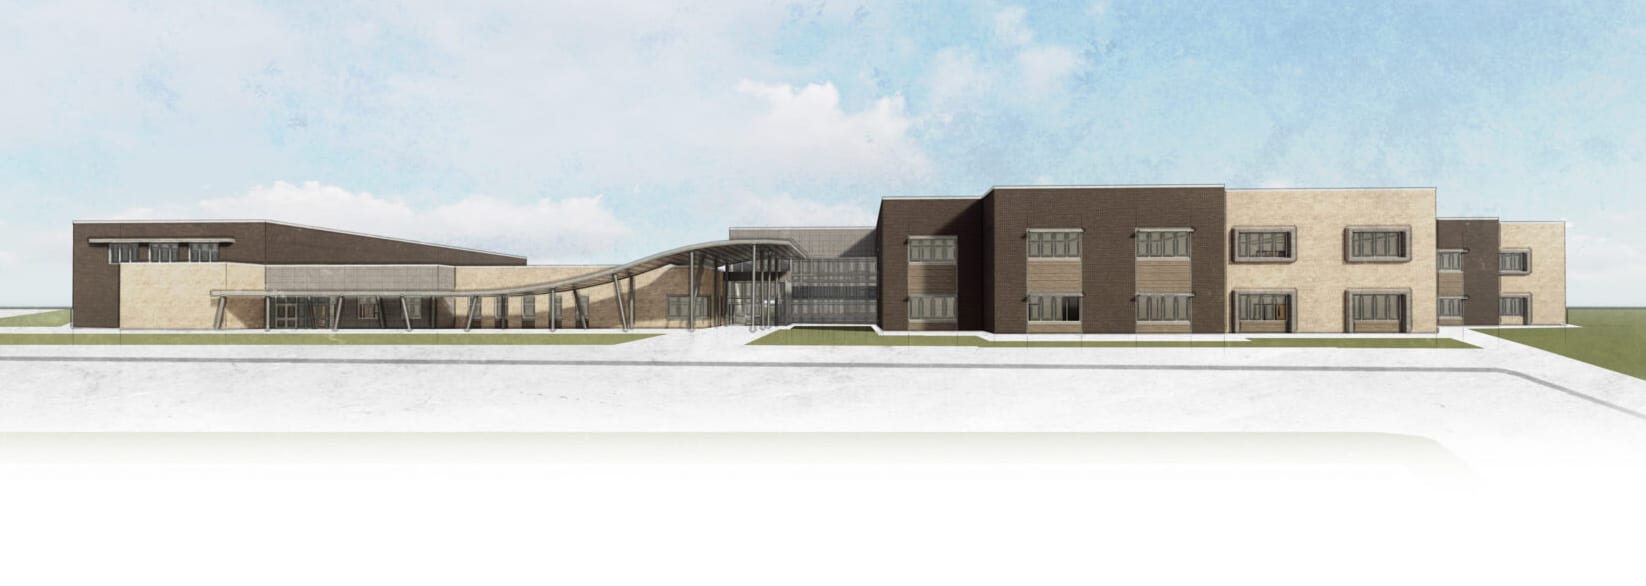 Architectural rendering of modern educational facility design.